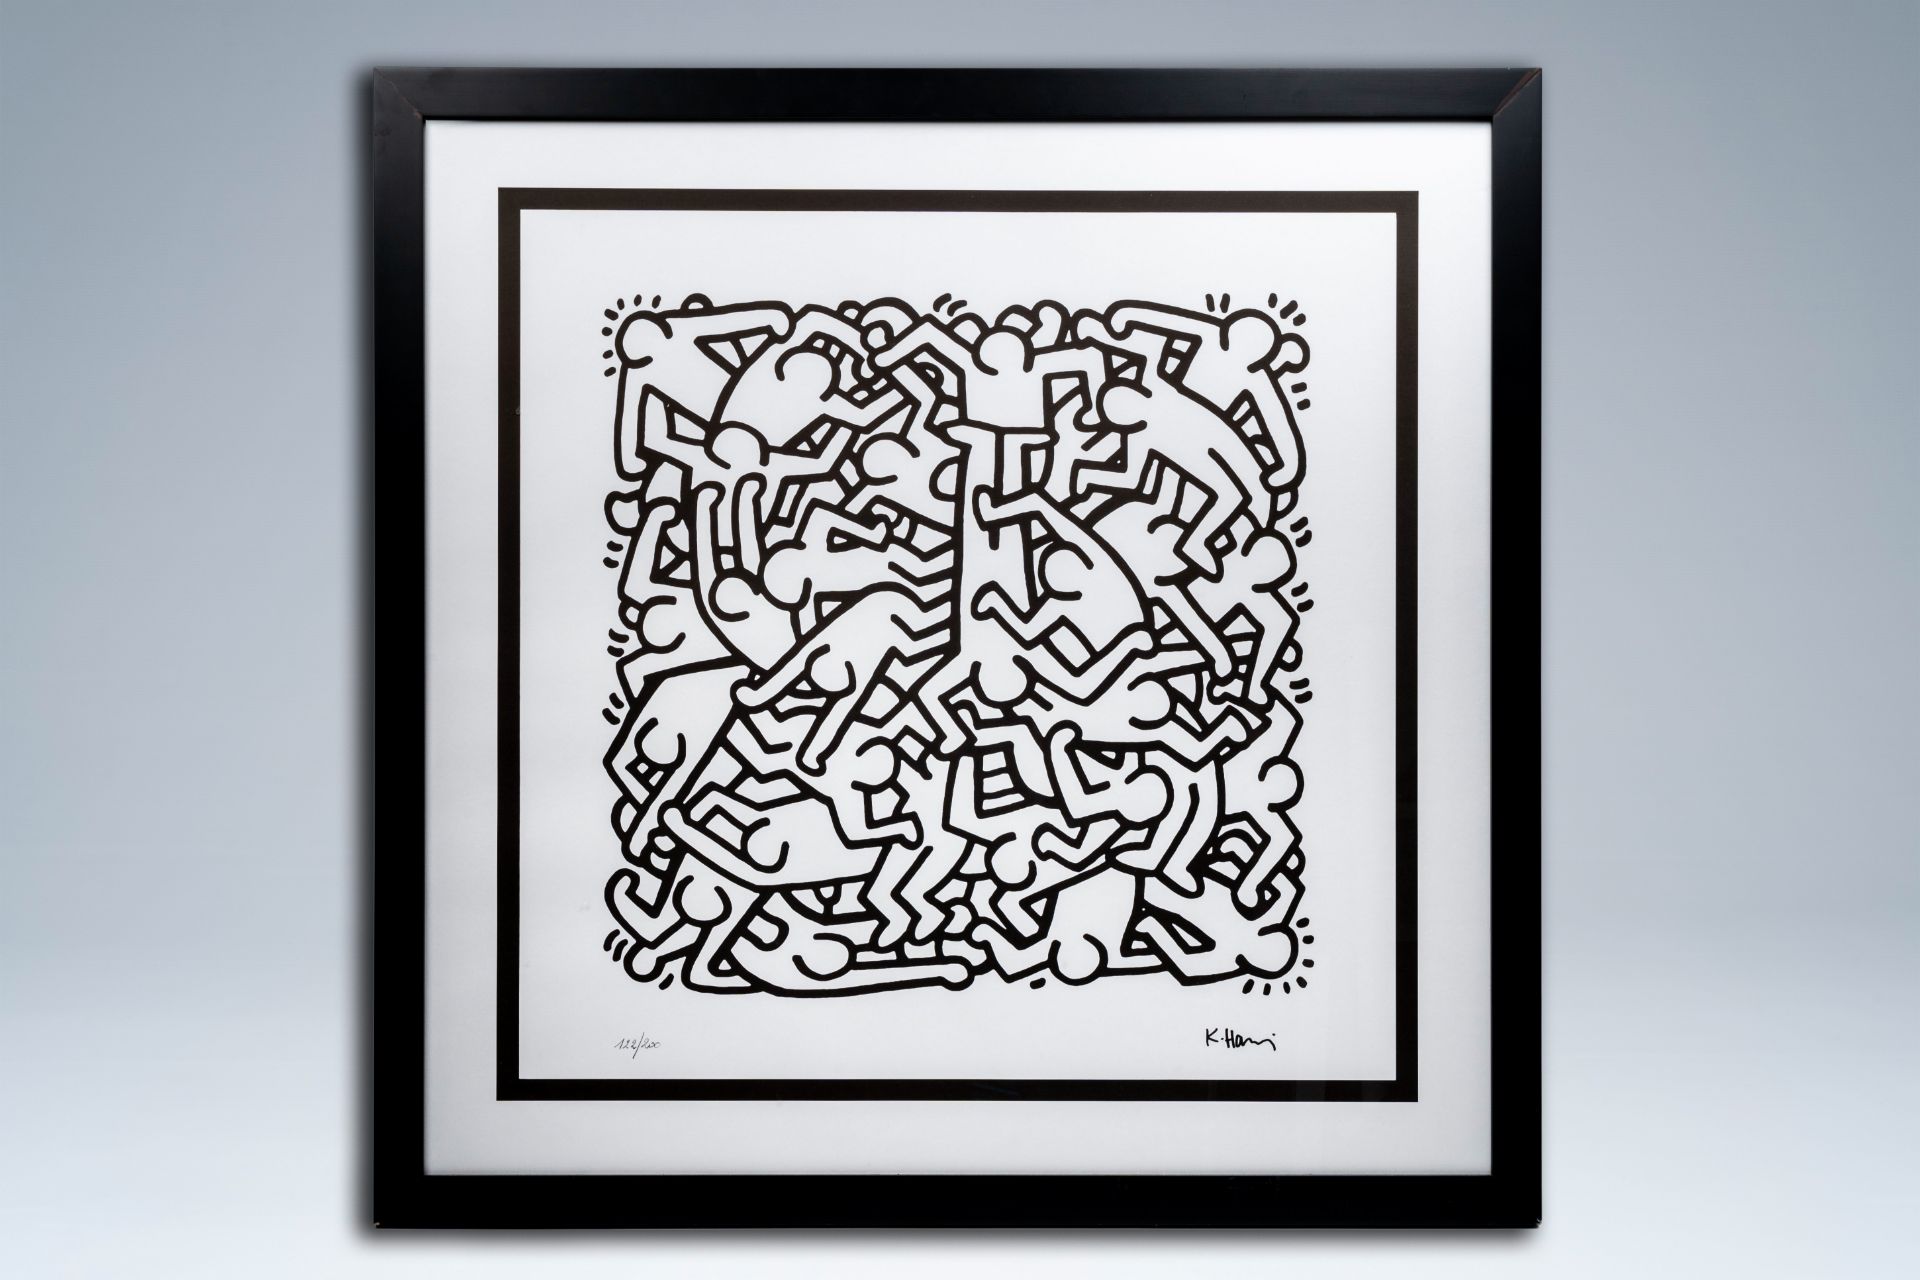 Keith Haring (1958-1990, after): 'Party of life invitation', serigraph, 122/200 - Image 2 of 6